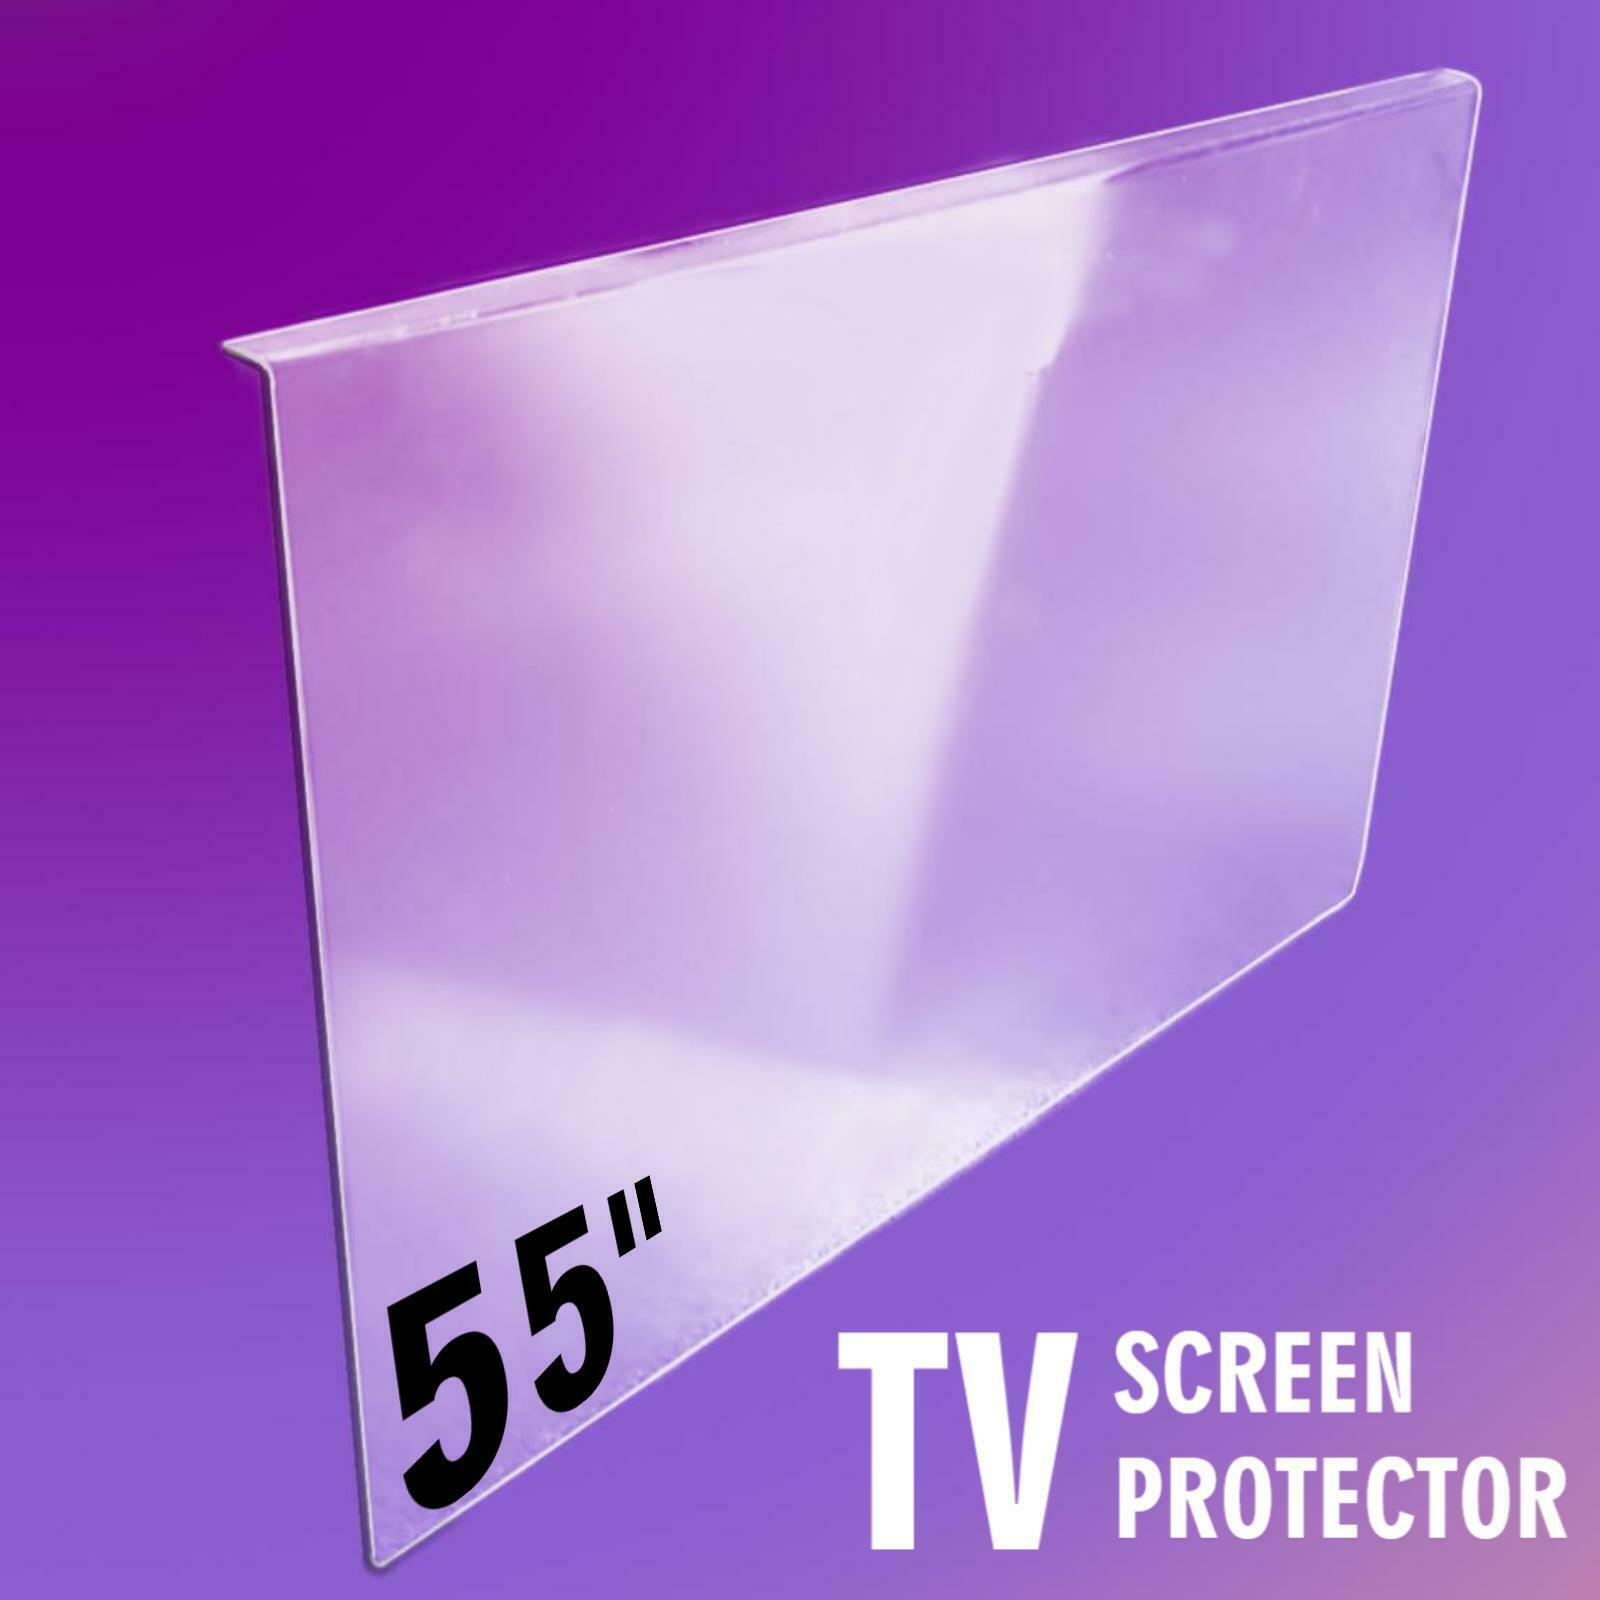 Screen Protectors for 55 Inch TV